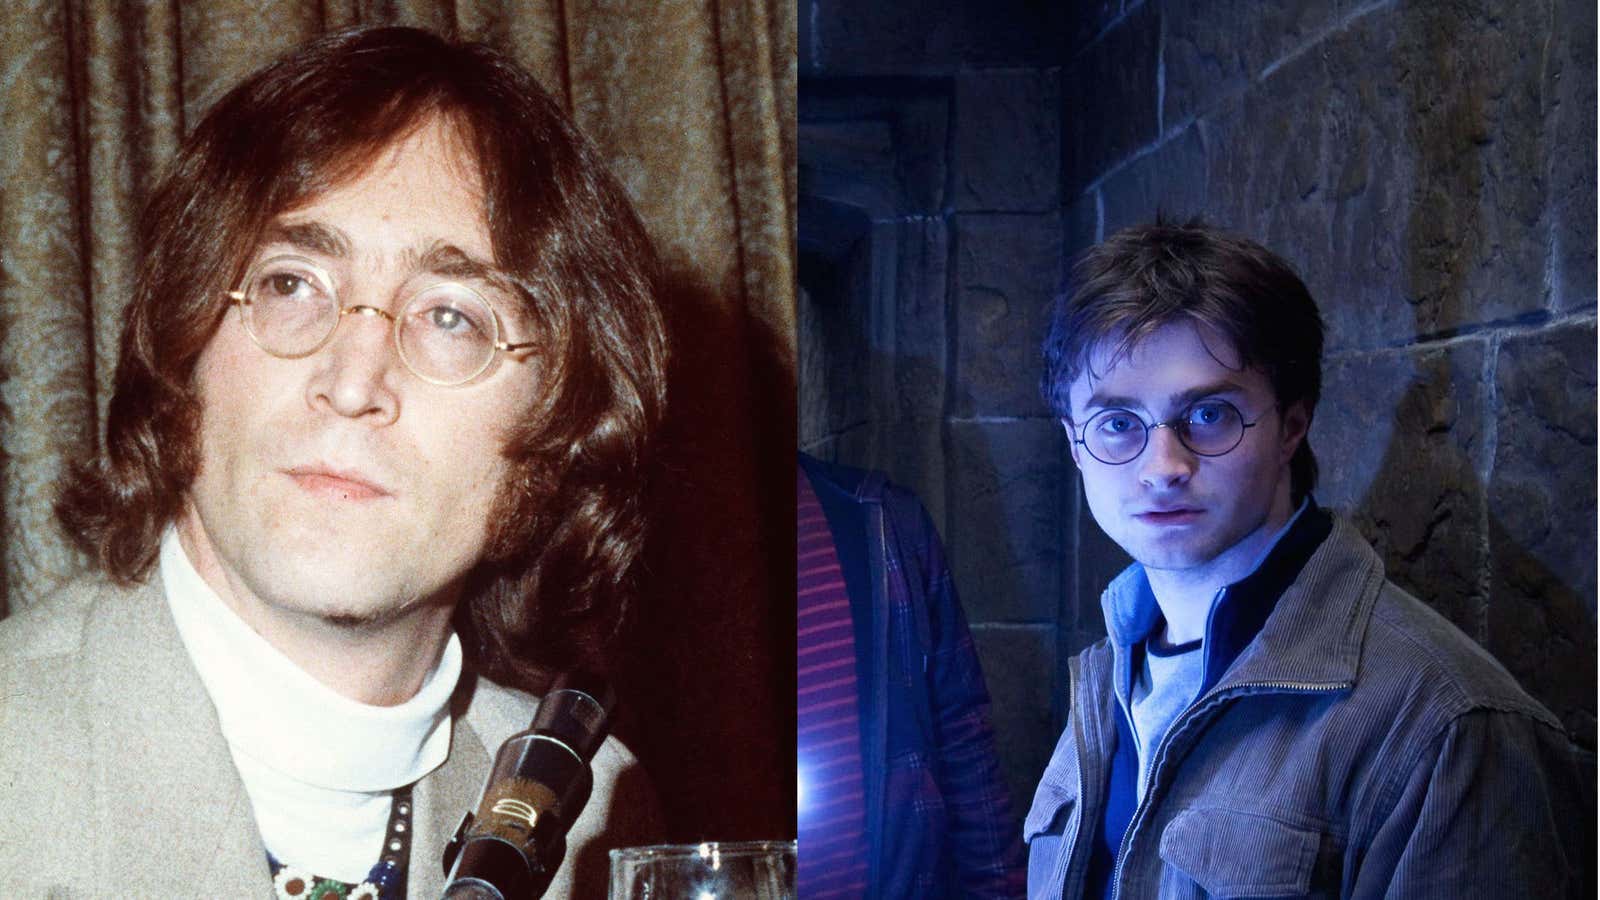 You see Lennon, they see Potter.